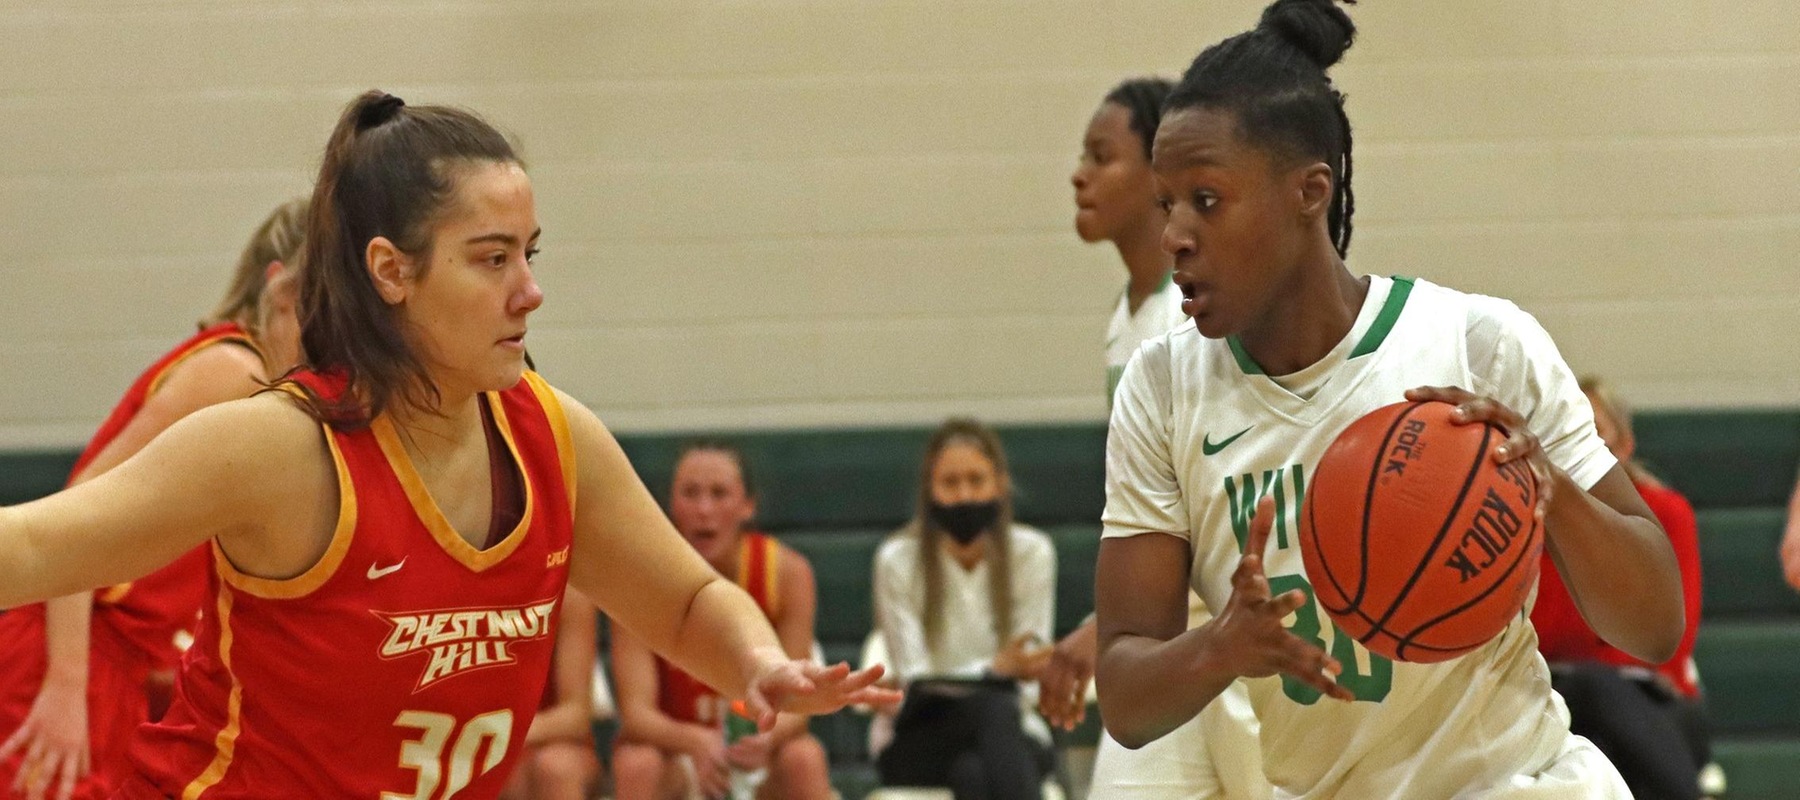 Photo of Emily Ansah who led the Wildcats with 12 points against Chestnut Hill. Copyright 2022; Wilmington University. All rights reserved. Photo by Trudy Spence. January 5, 2022 vs. Chestnut Hill.